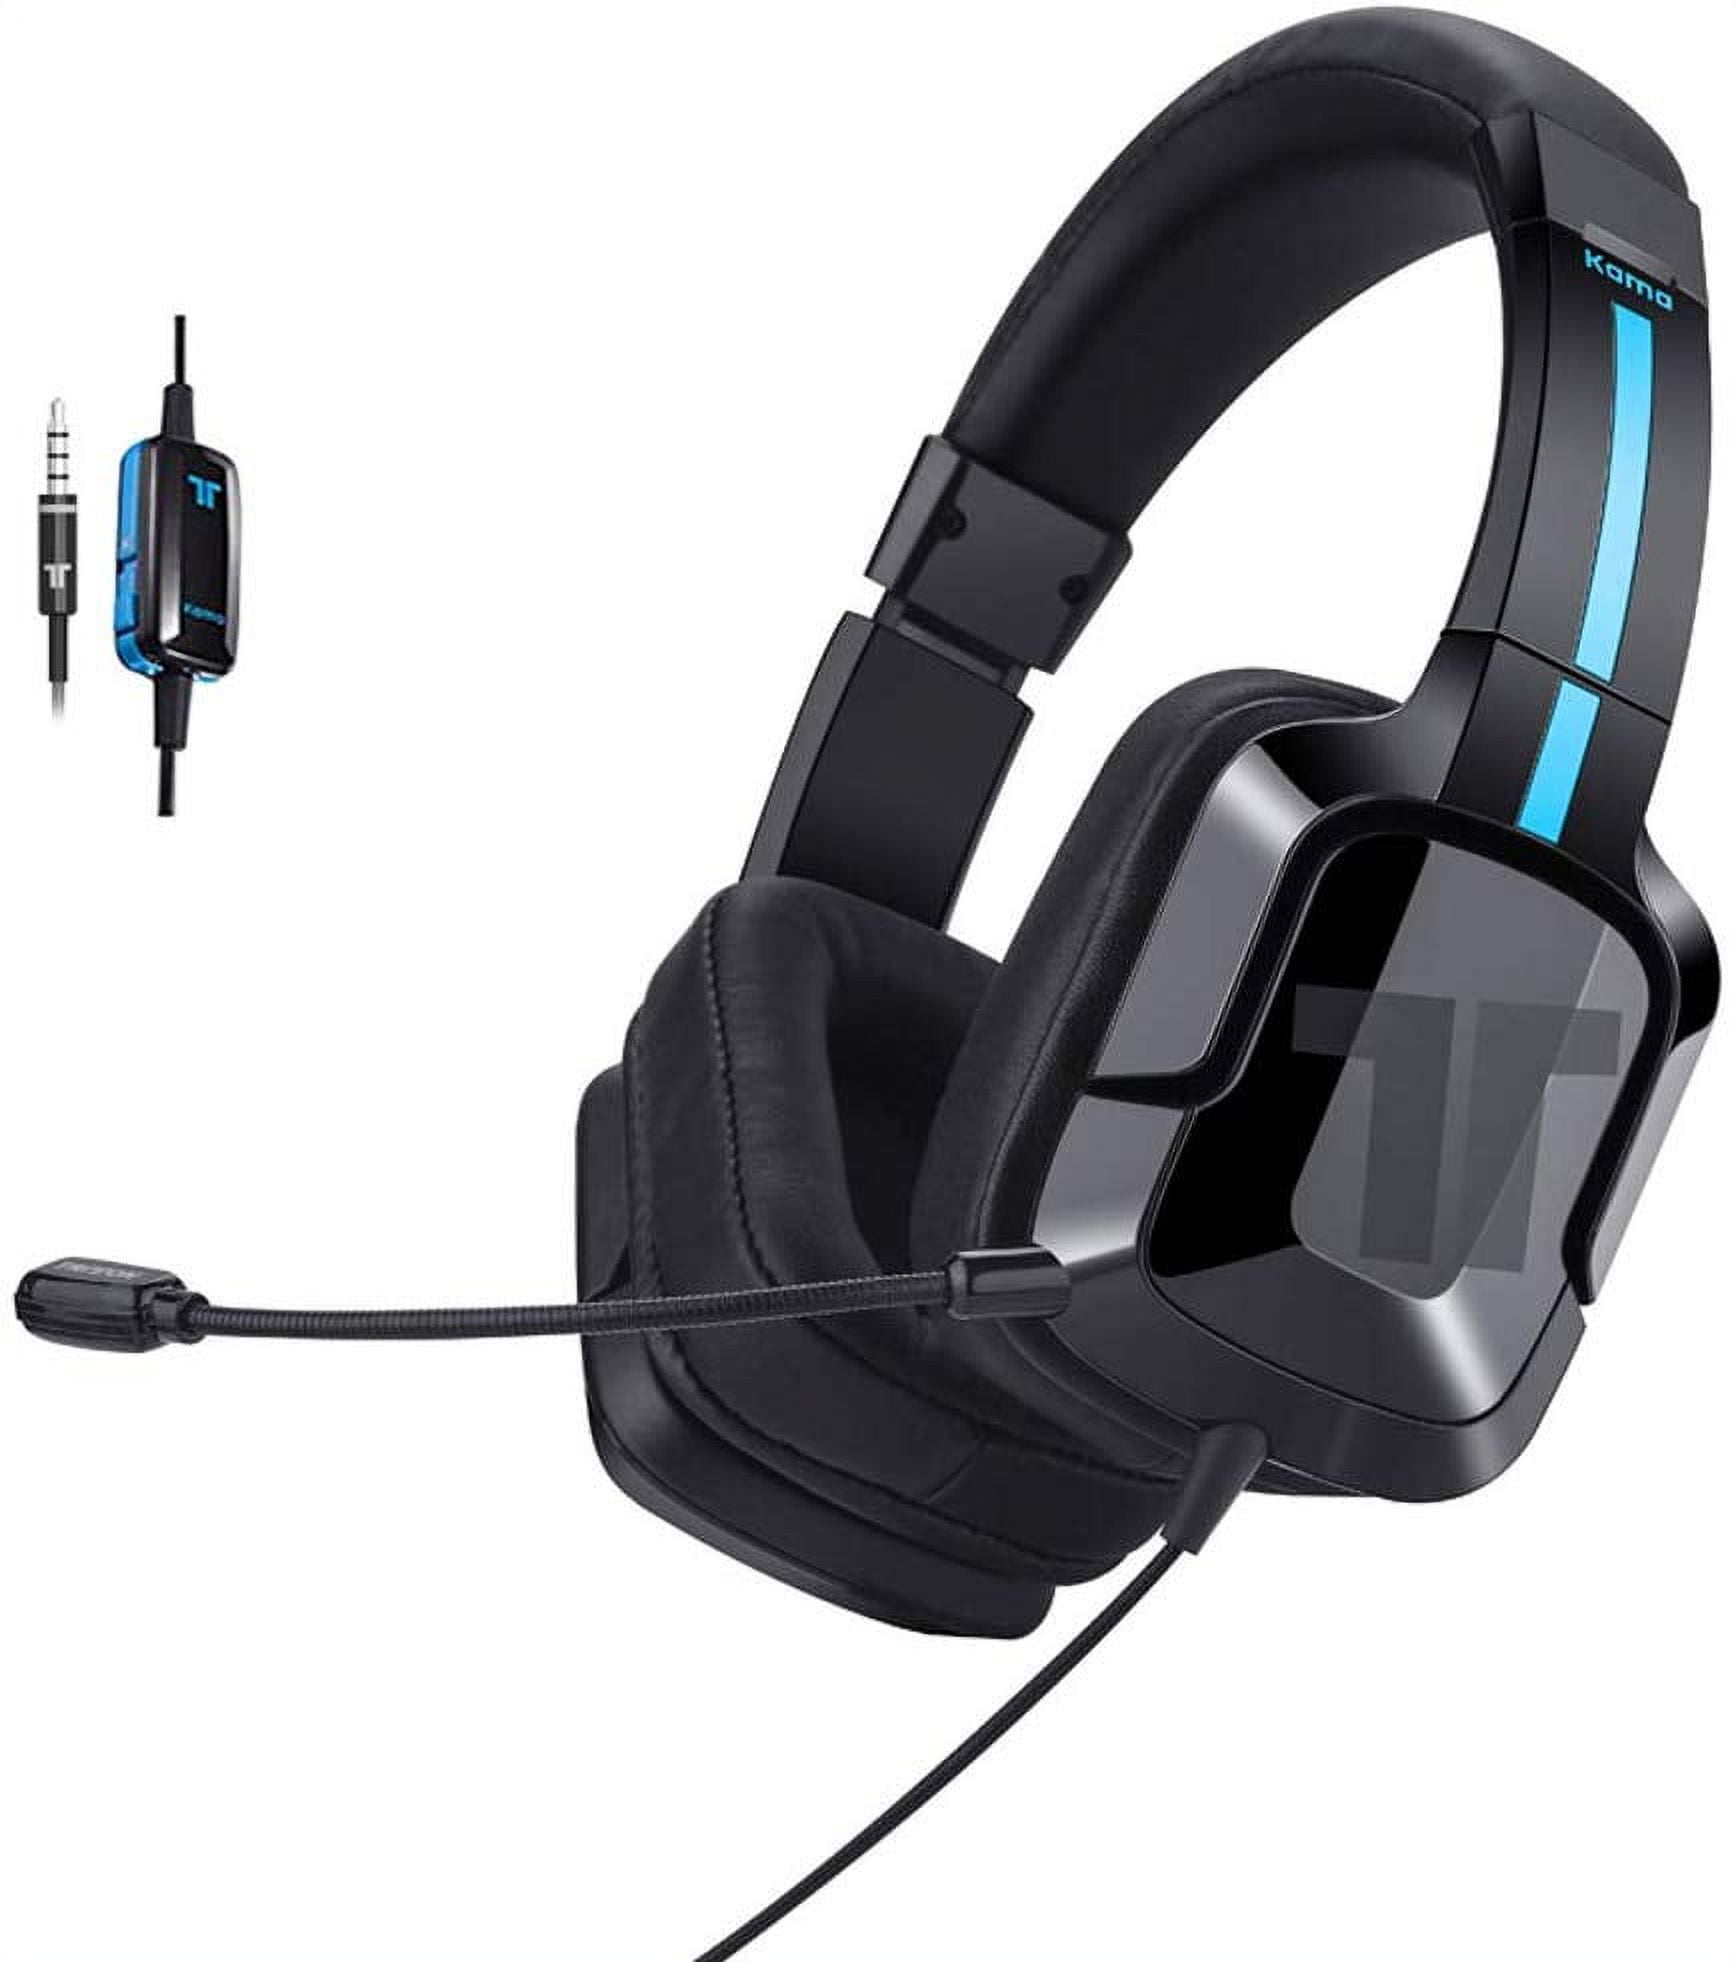 ARK200 Dynamic Range Gaming Headset, Vocal Enhanced - Non-wired